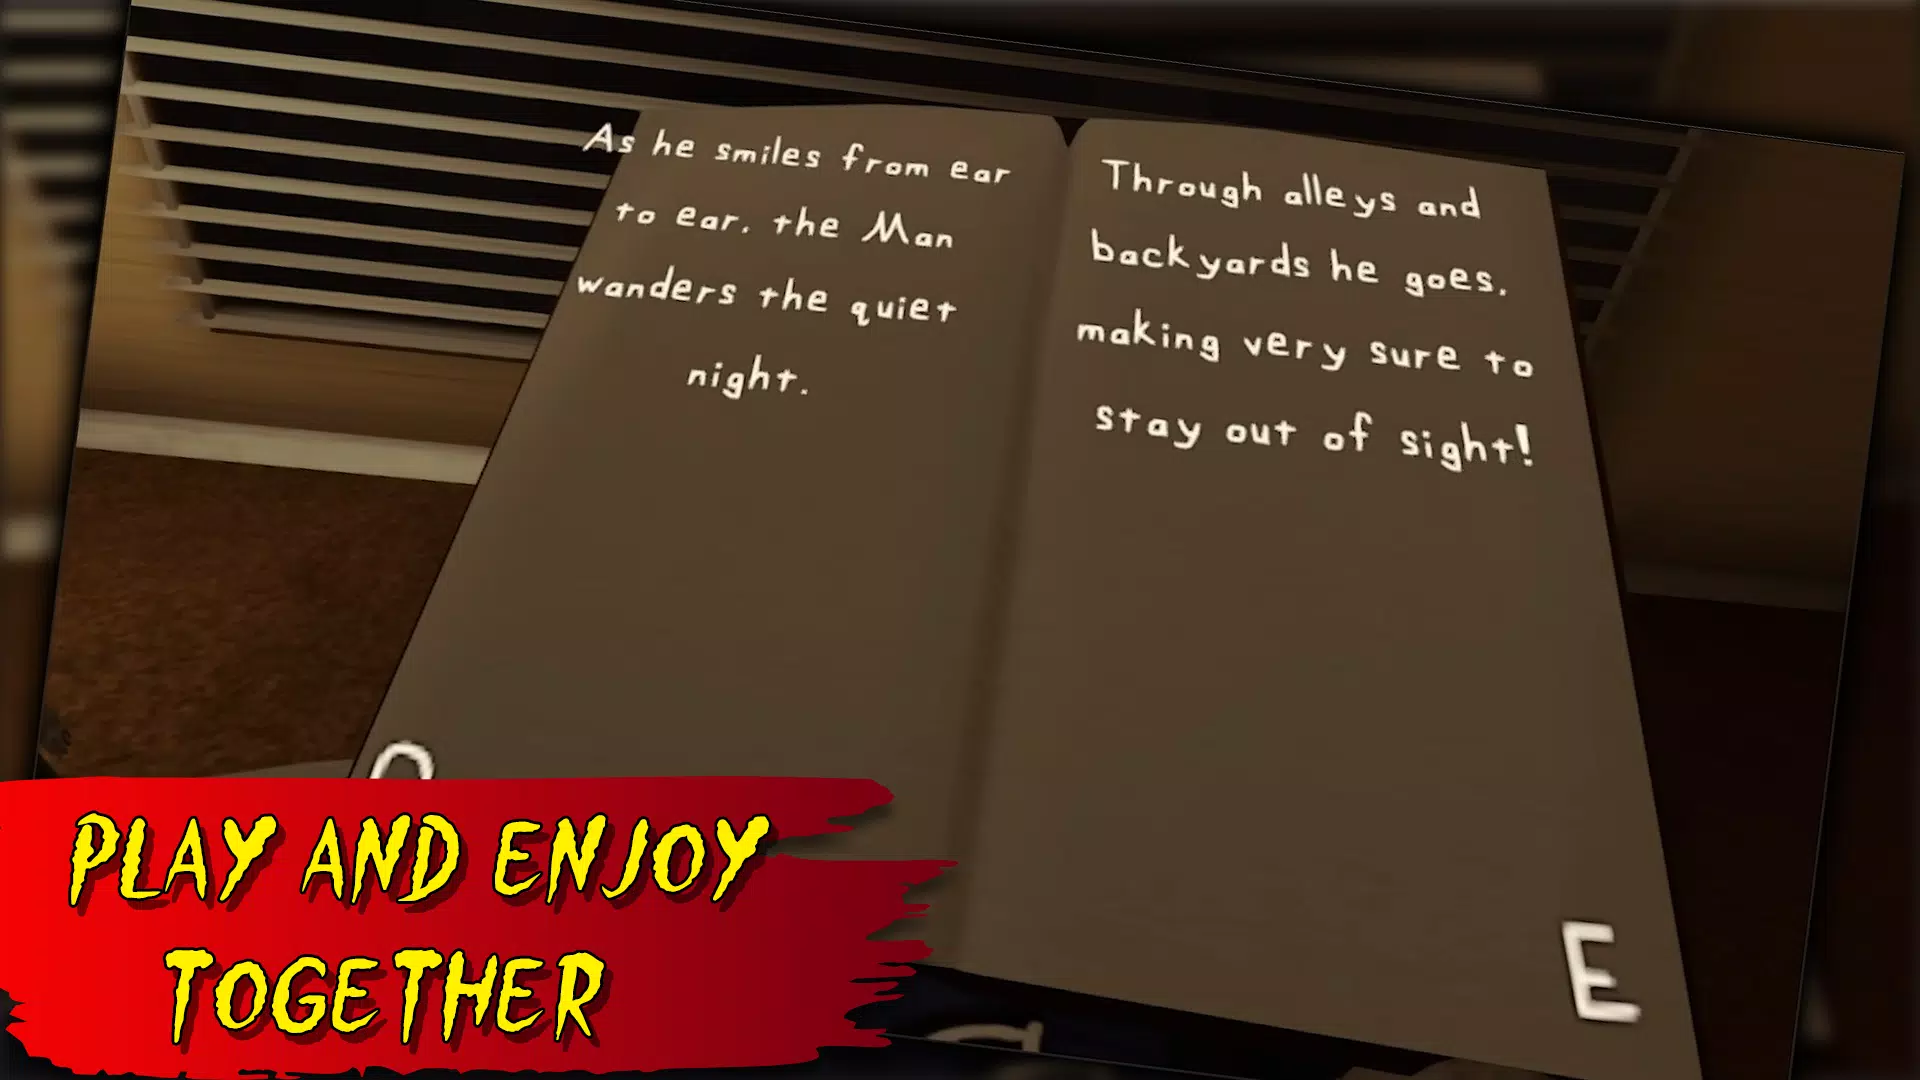 The Scary Man from the Window APK Download for Android